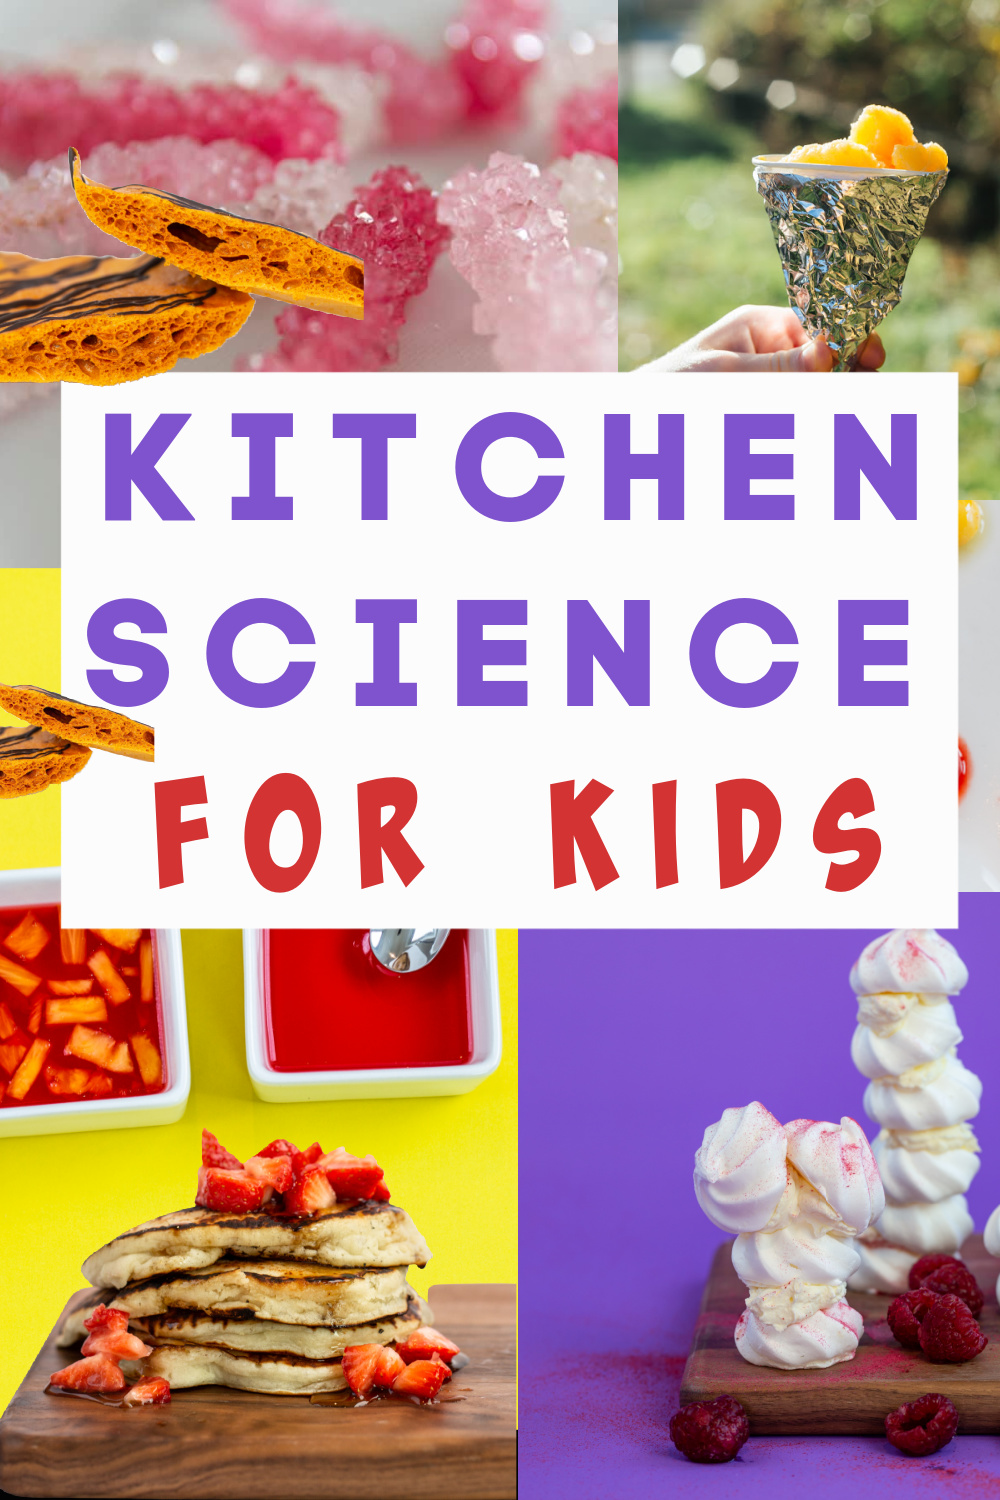 Kitchen Science Experiments for Kids - 50 Awesome Experiments